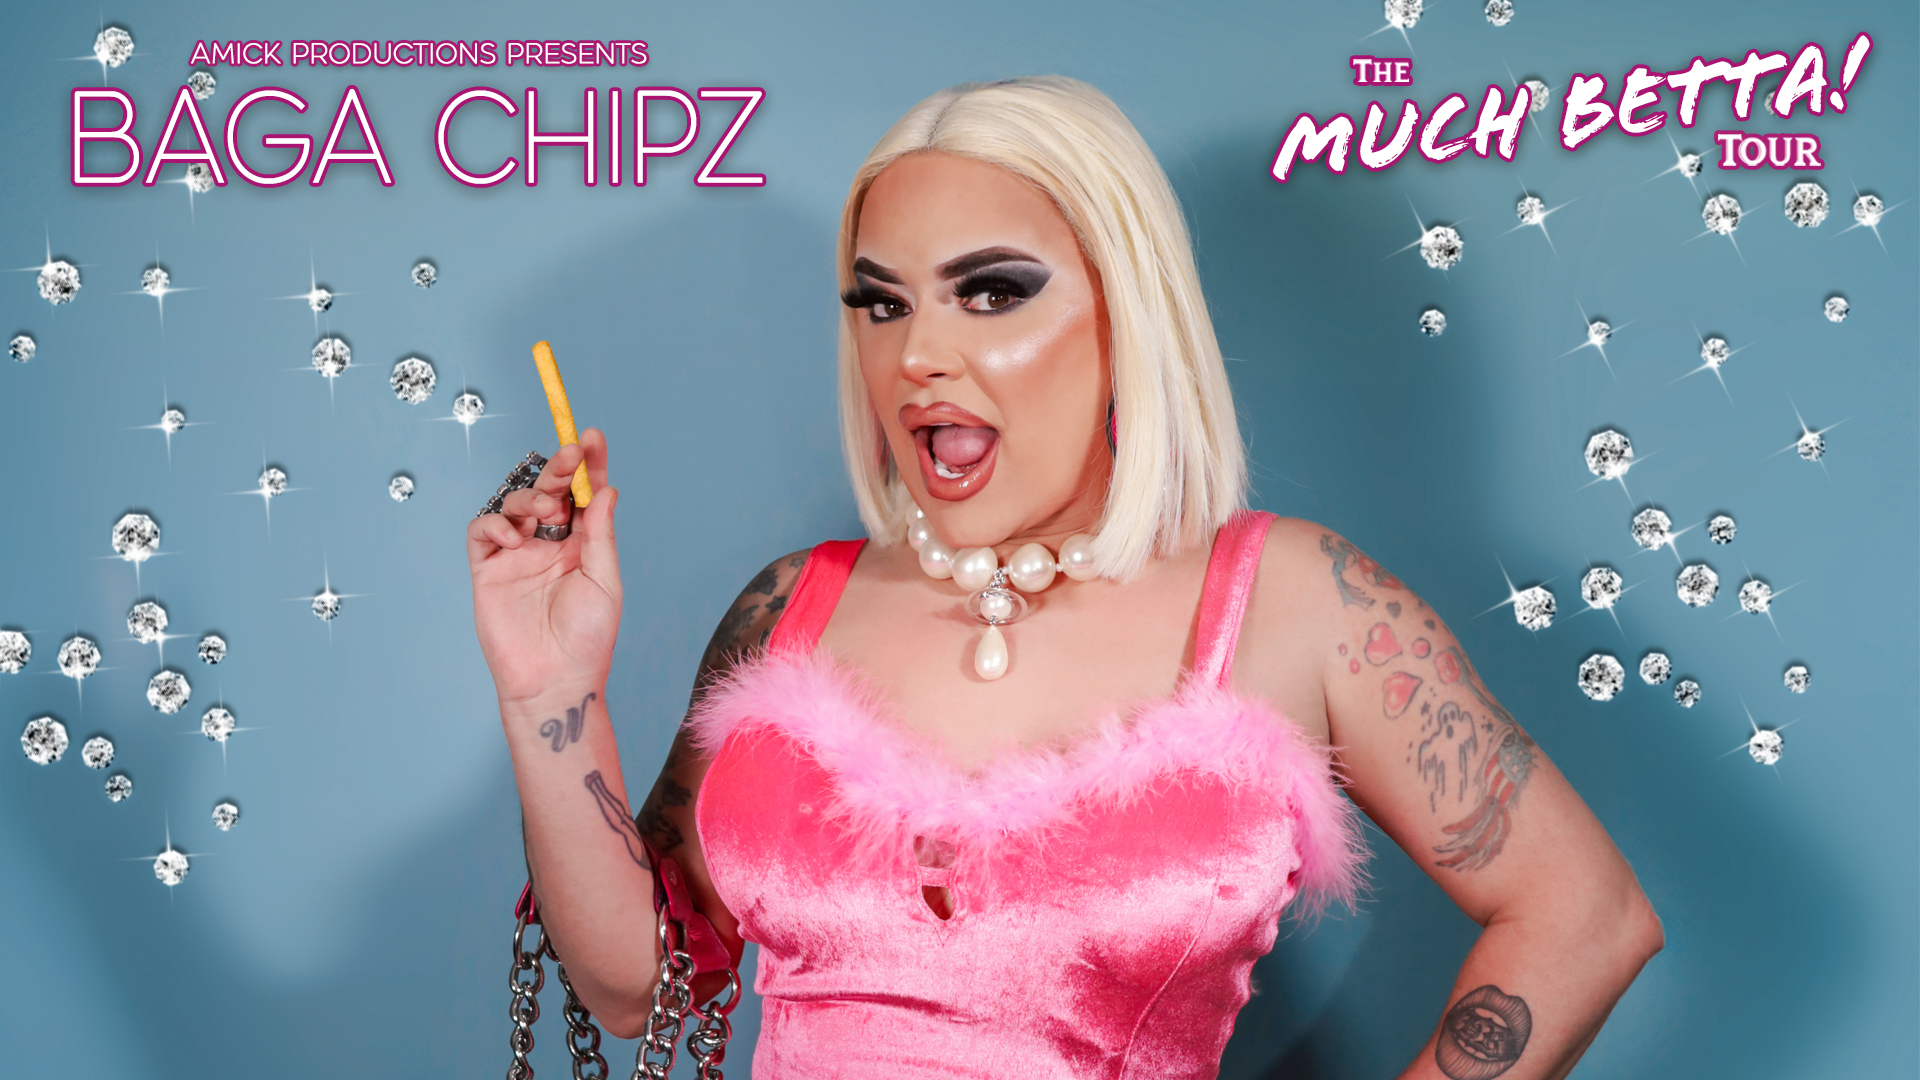 A drag queen in a pink dress and blonde wig poses with a bag full of chips